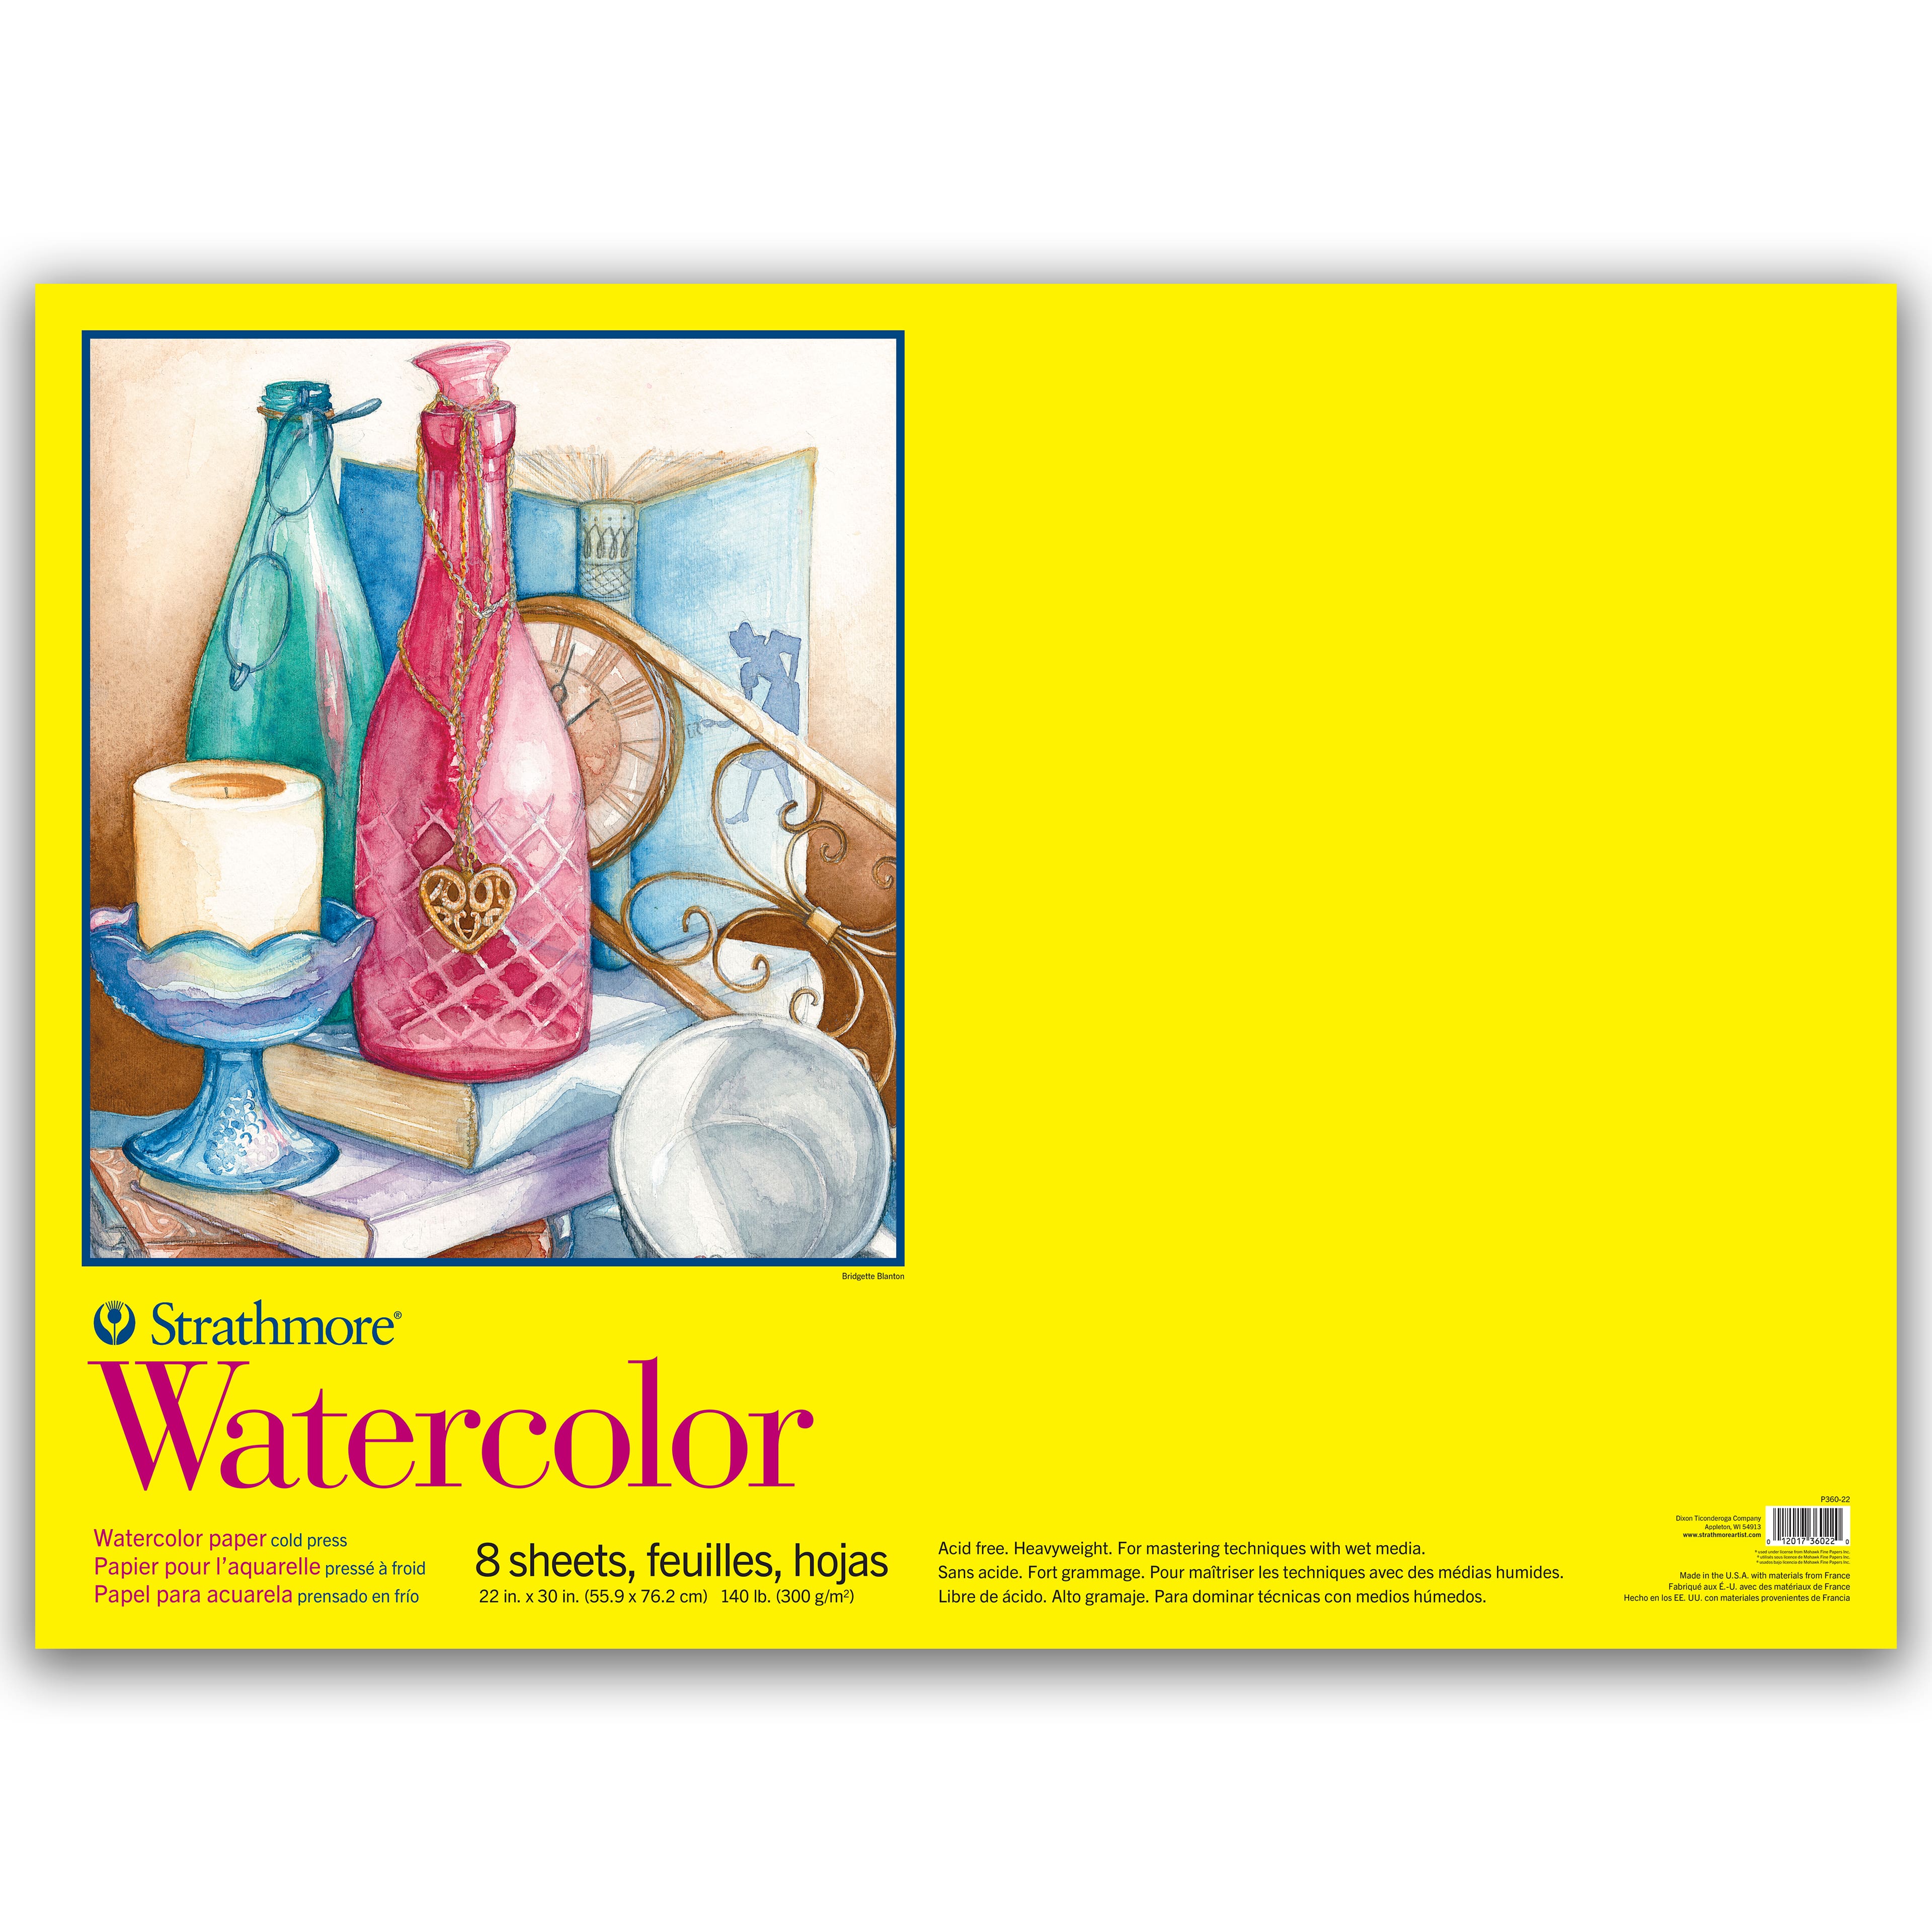 Strathmore® 300 Series Cold Press Watercolor Paper Pad, 22 x 30